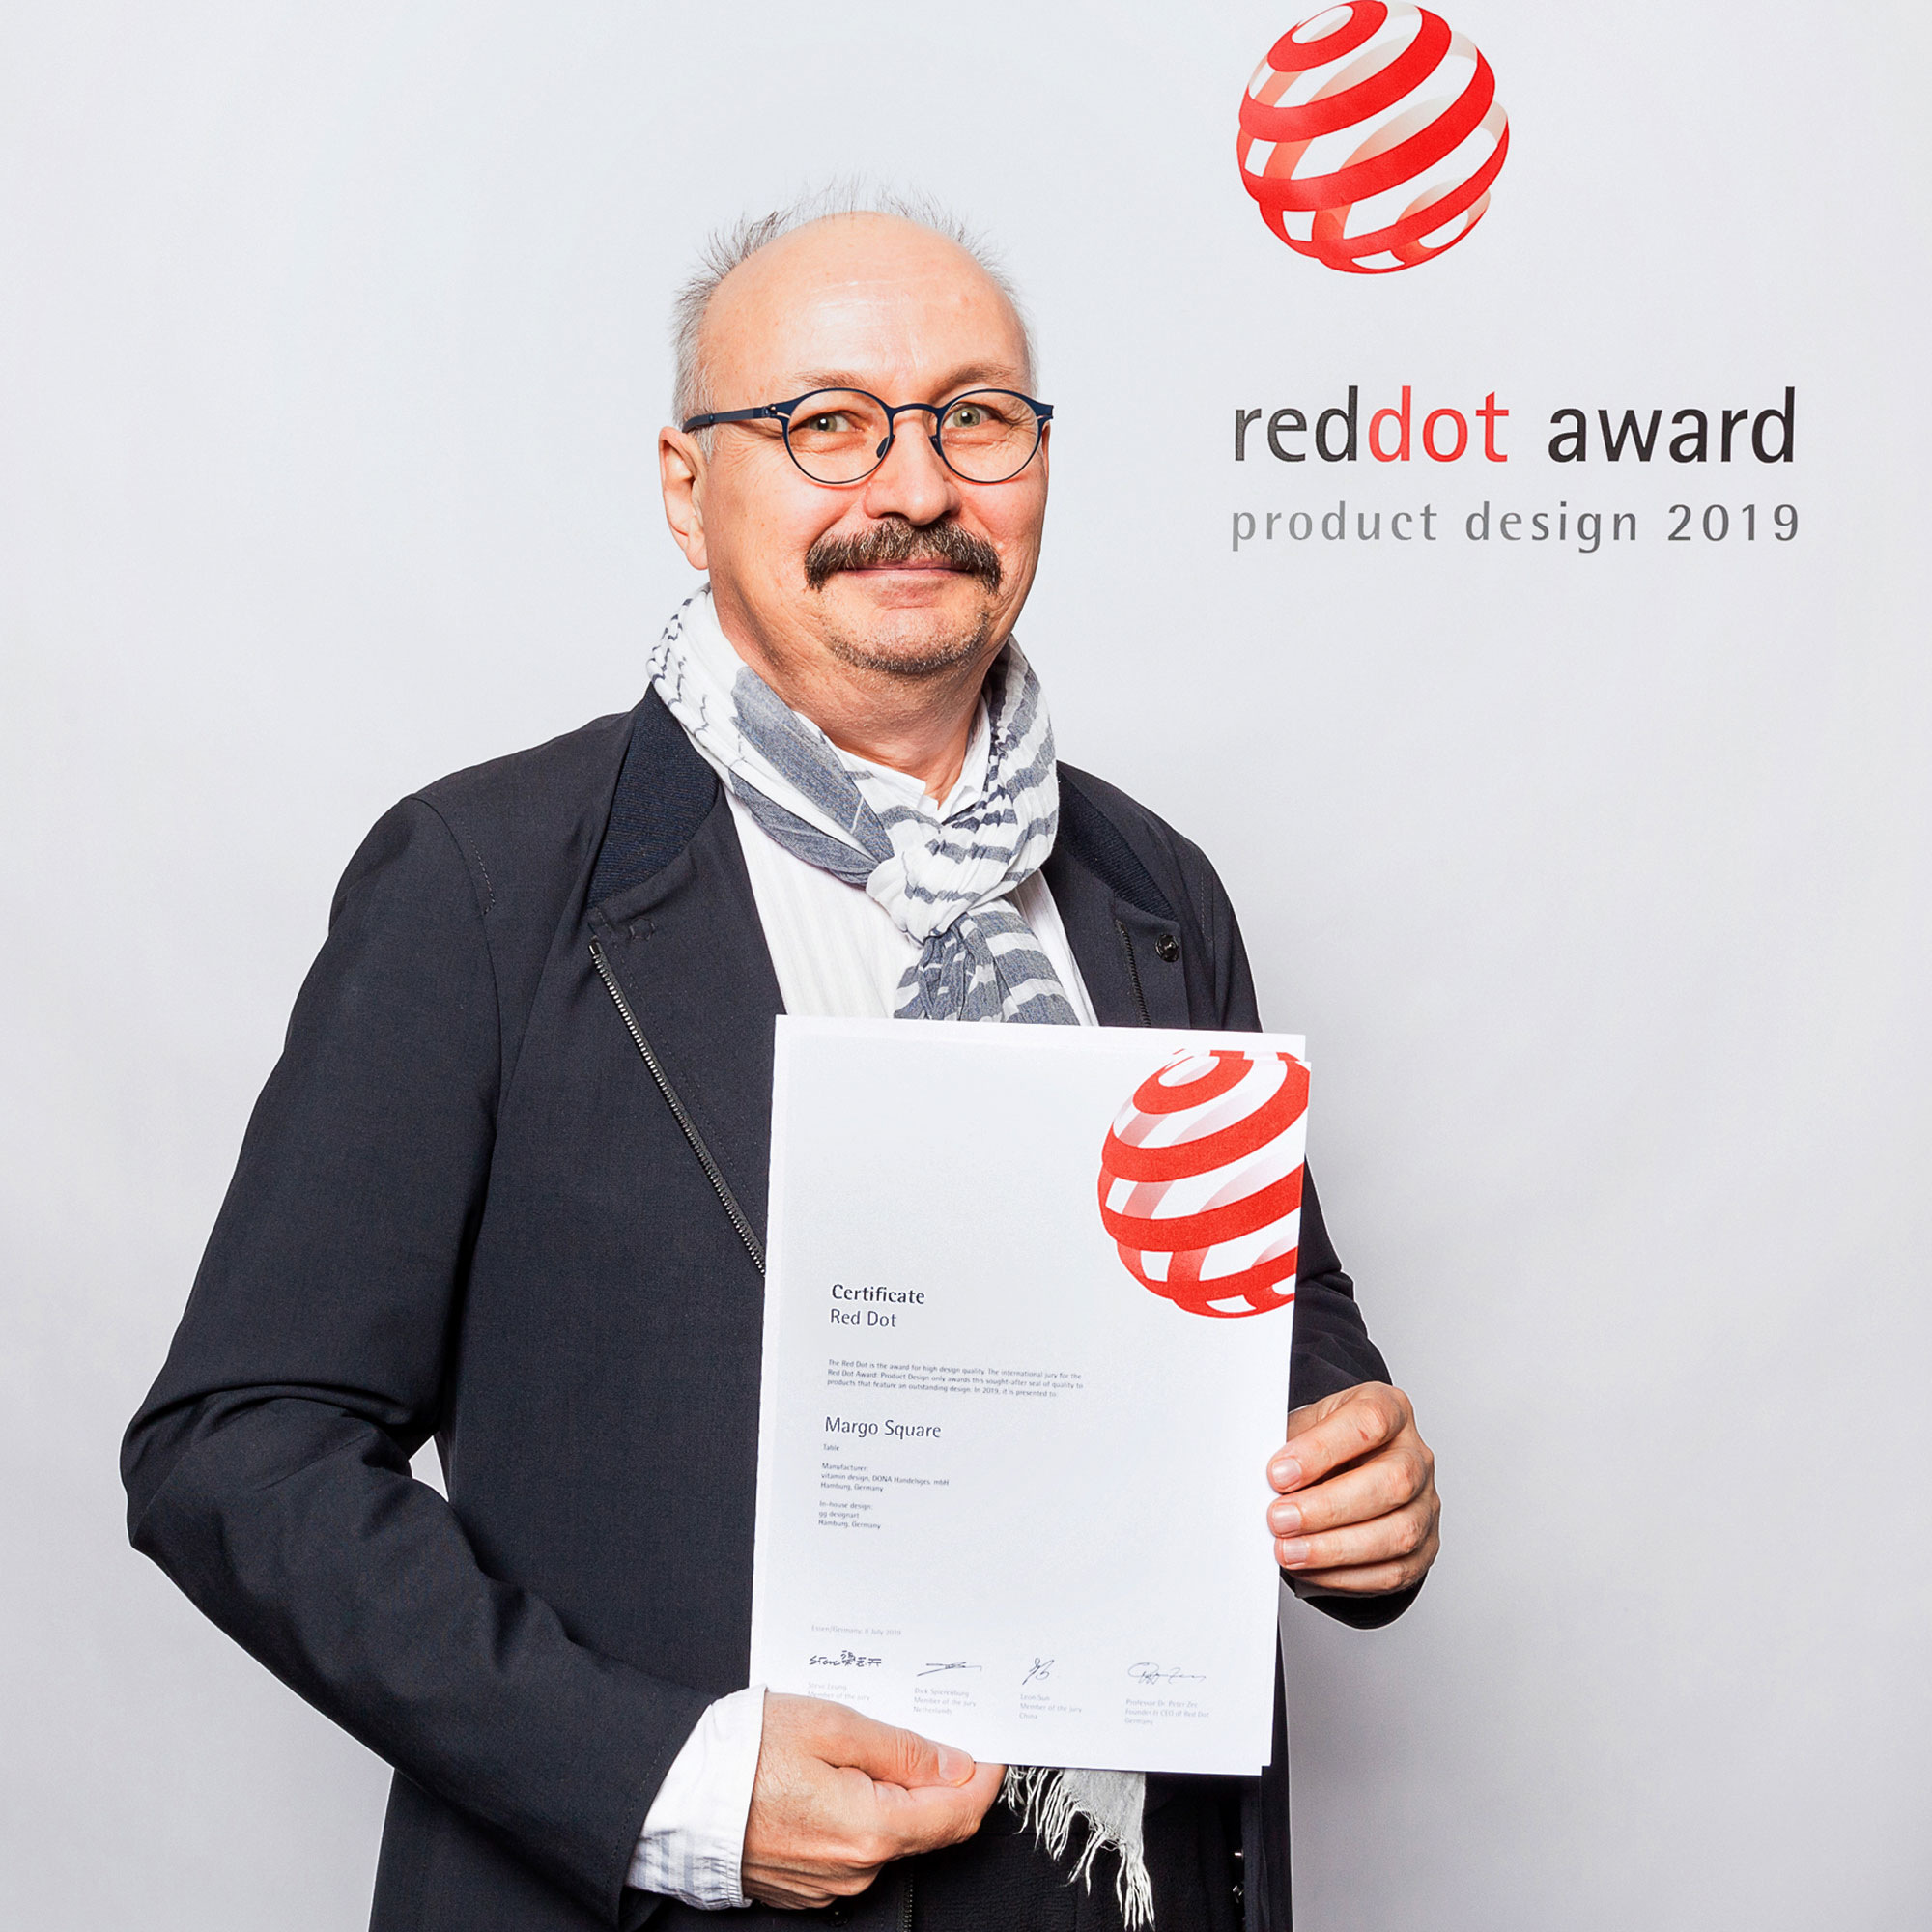 A year of changes: the Red Dot Award 2019 in retrospective